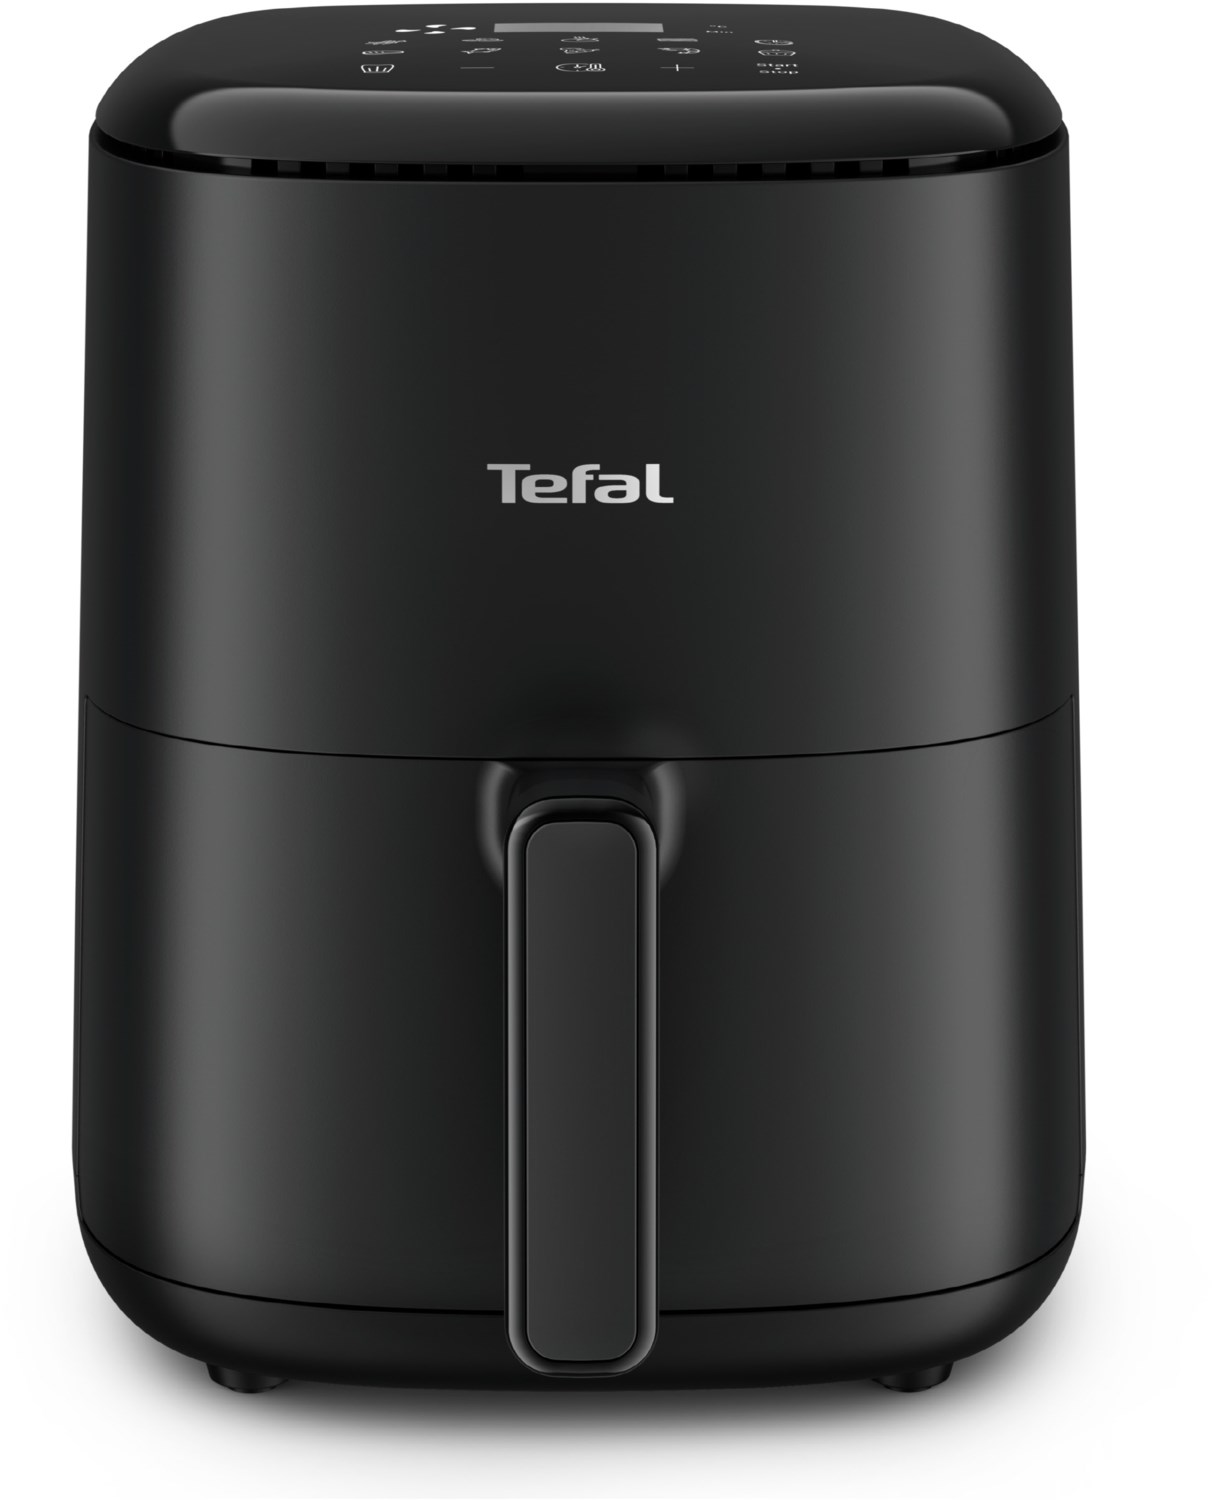 EY1458 Easy Fry Compact Heißluft-Fritteuse von Tefal